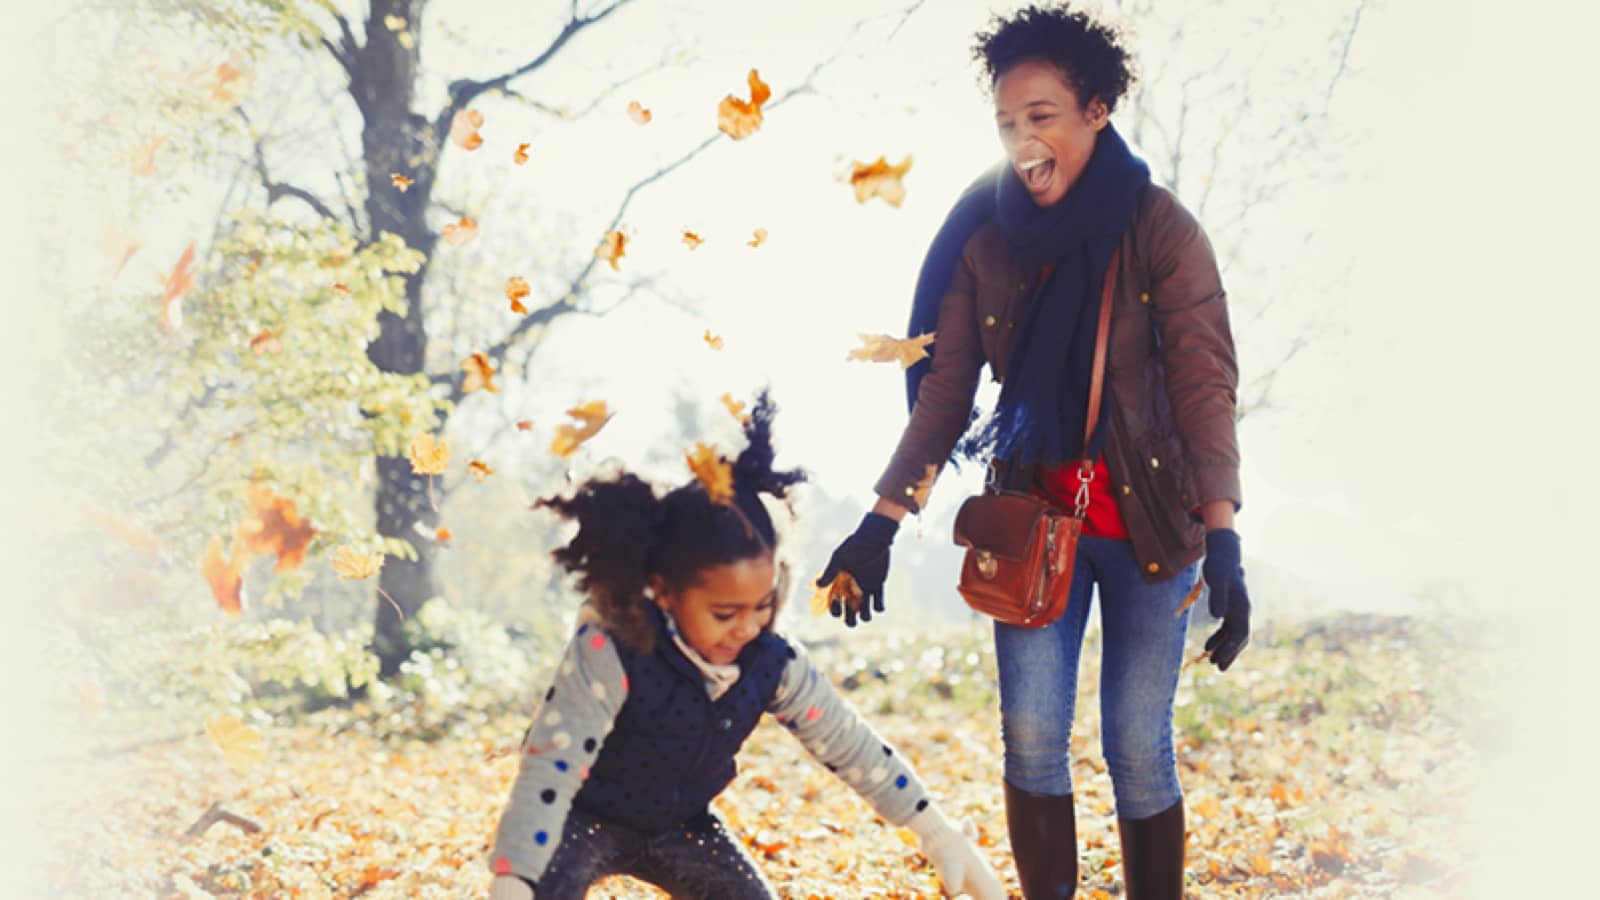 Mother and daughter playing in falling leaves